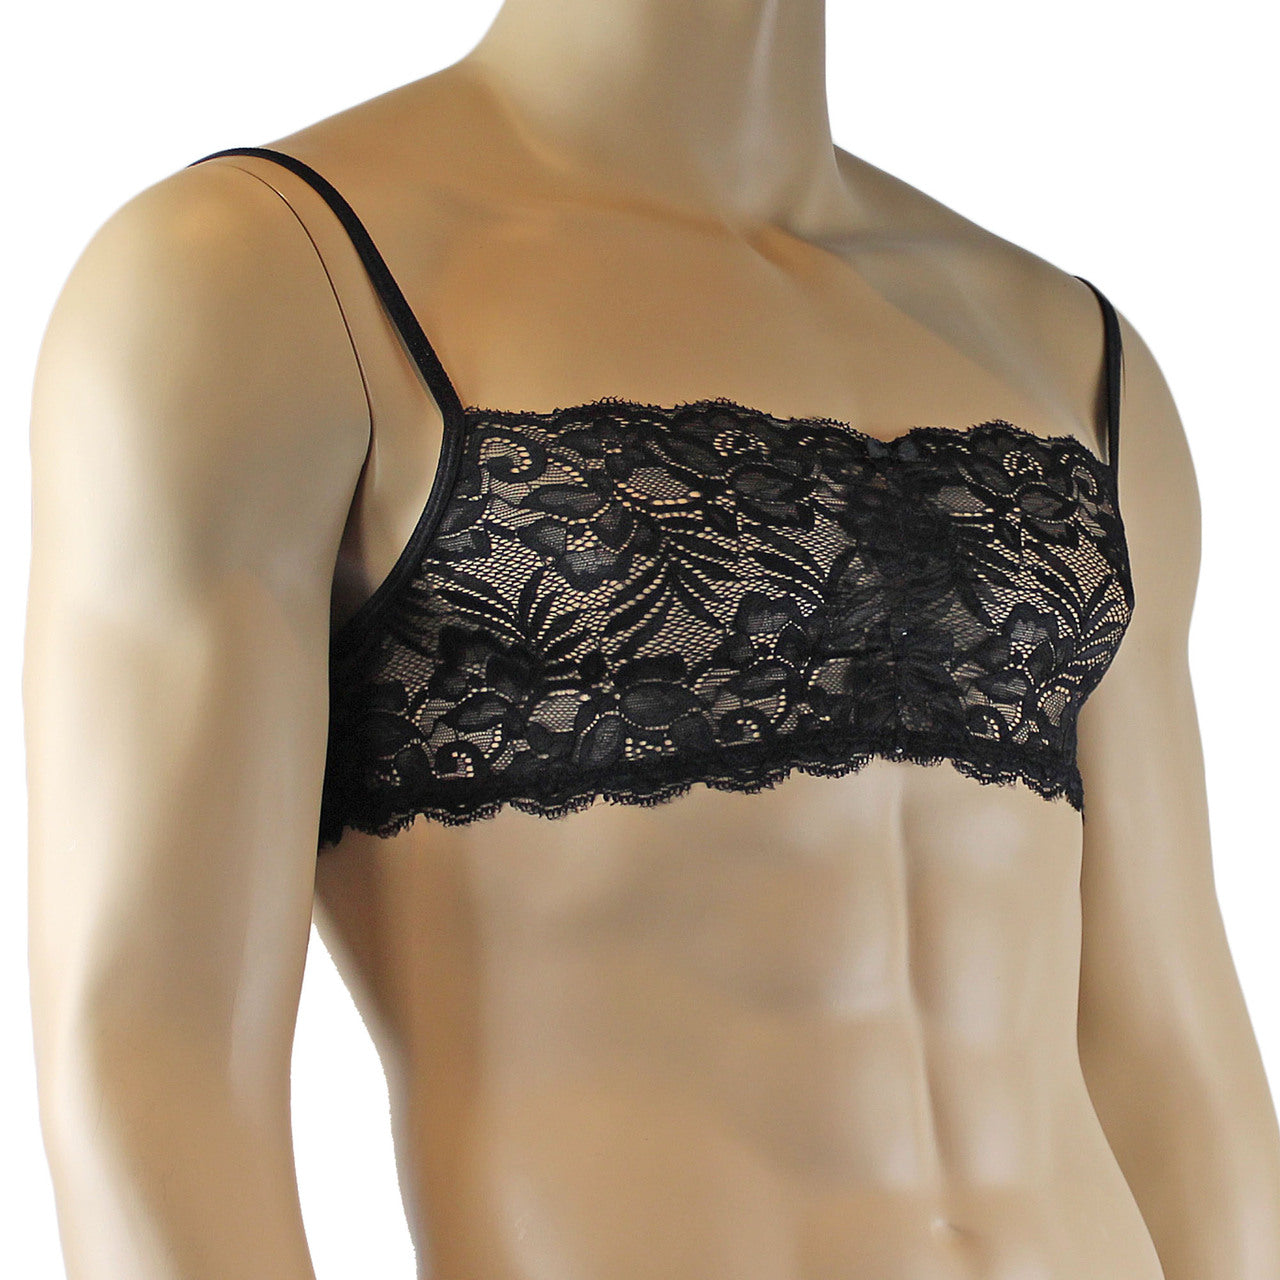 Mens Lingerie Bra Top in Lace with thin Straps (black plus other colours)